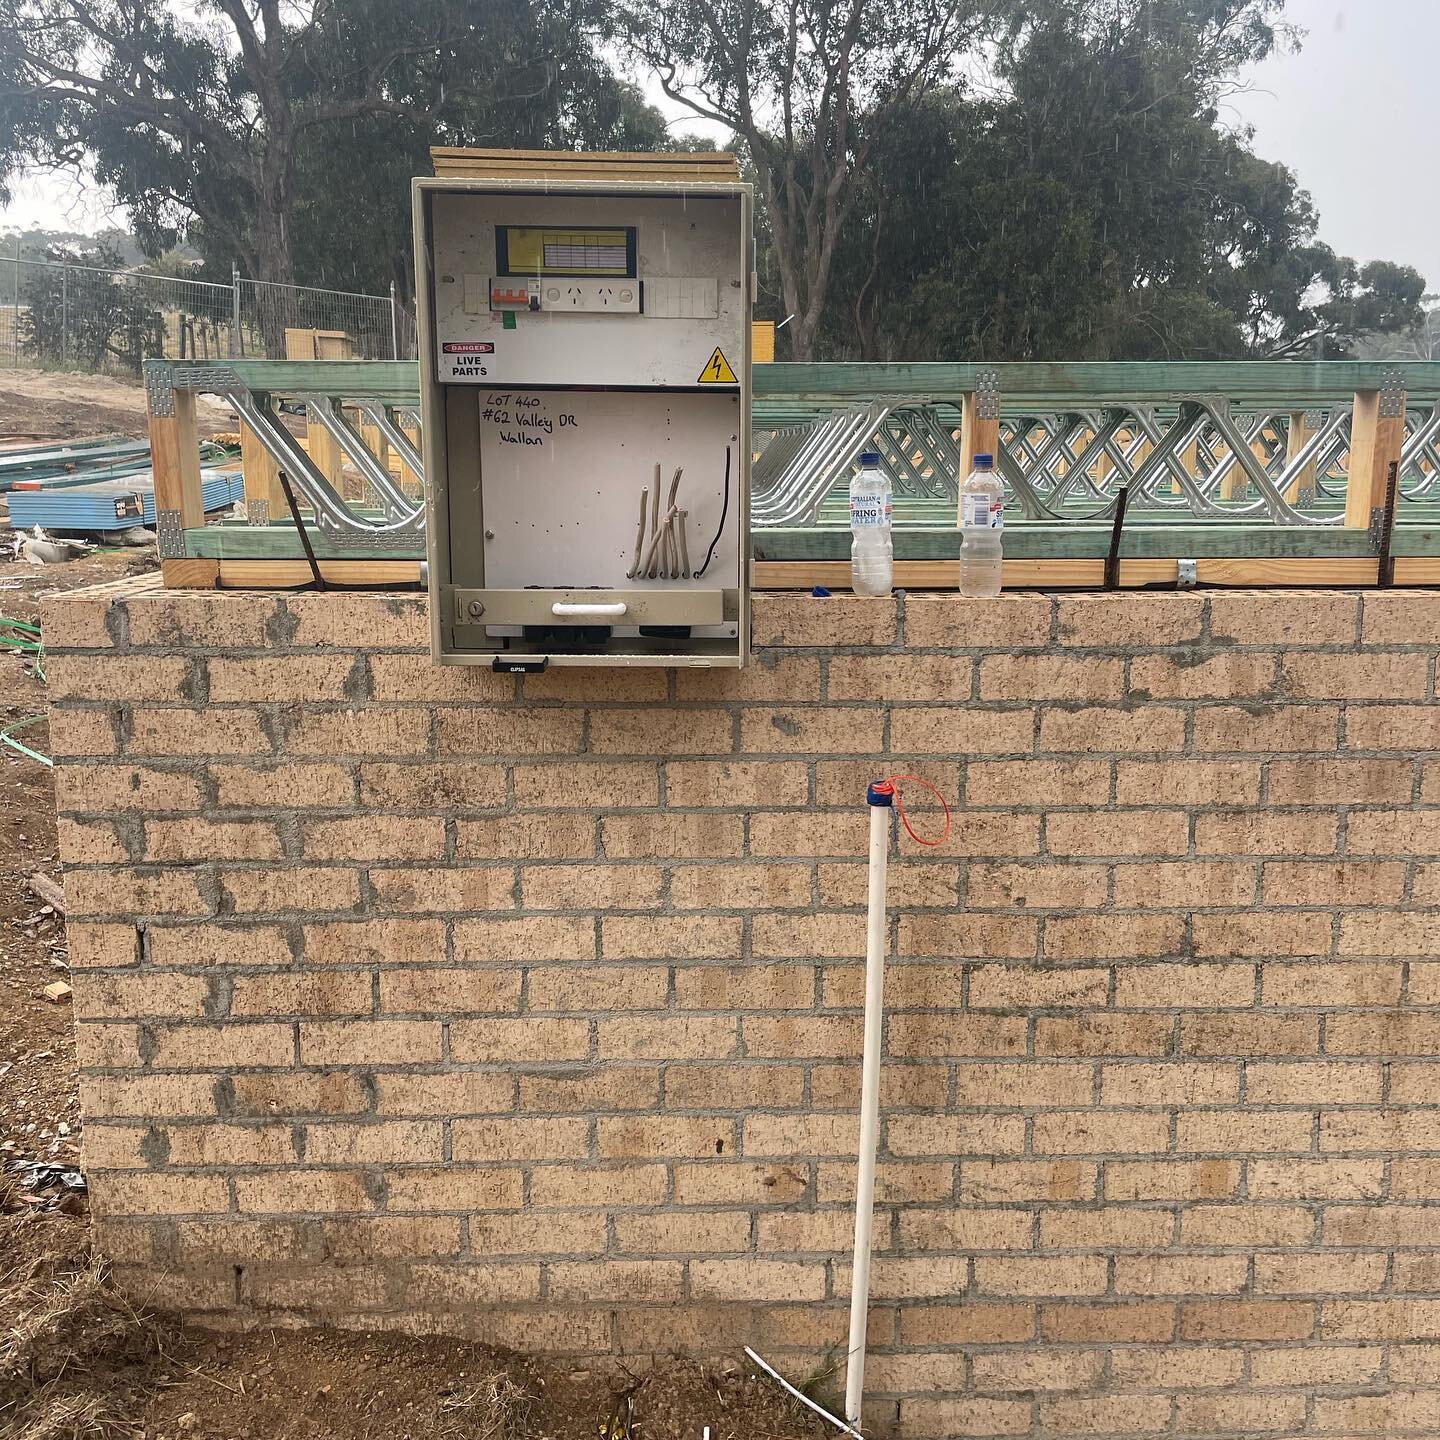 3 phase underground completed for our Wallan project today, tricky one but got there! Looking forward to this one ⚡️

#elec #melbourneelectrician #electrician #electricians #electrical #contractor #renovation #sparky #sparkie #jobsite #job #worksite 